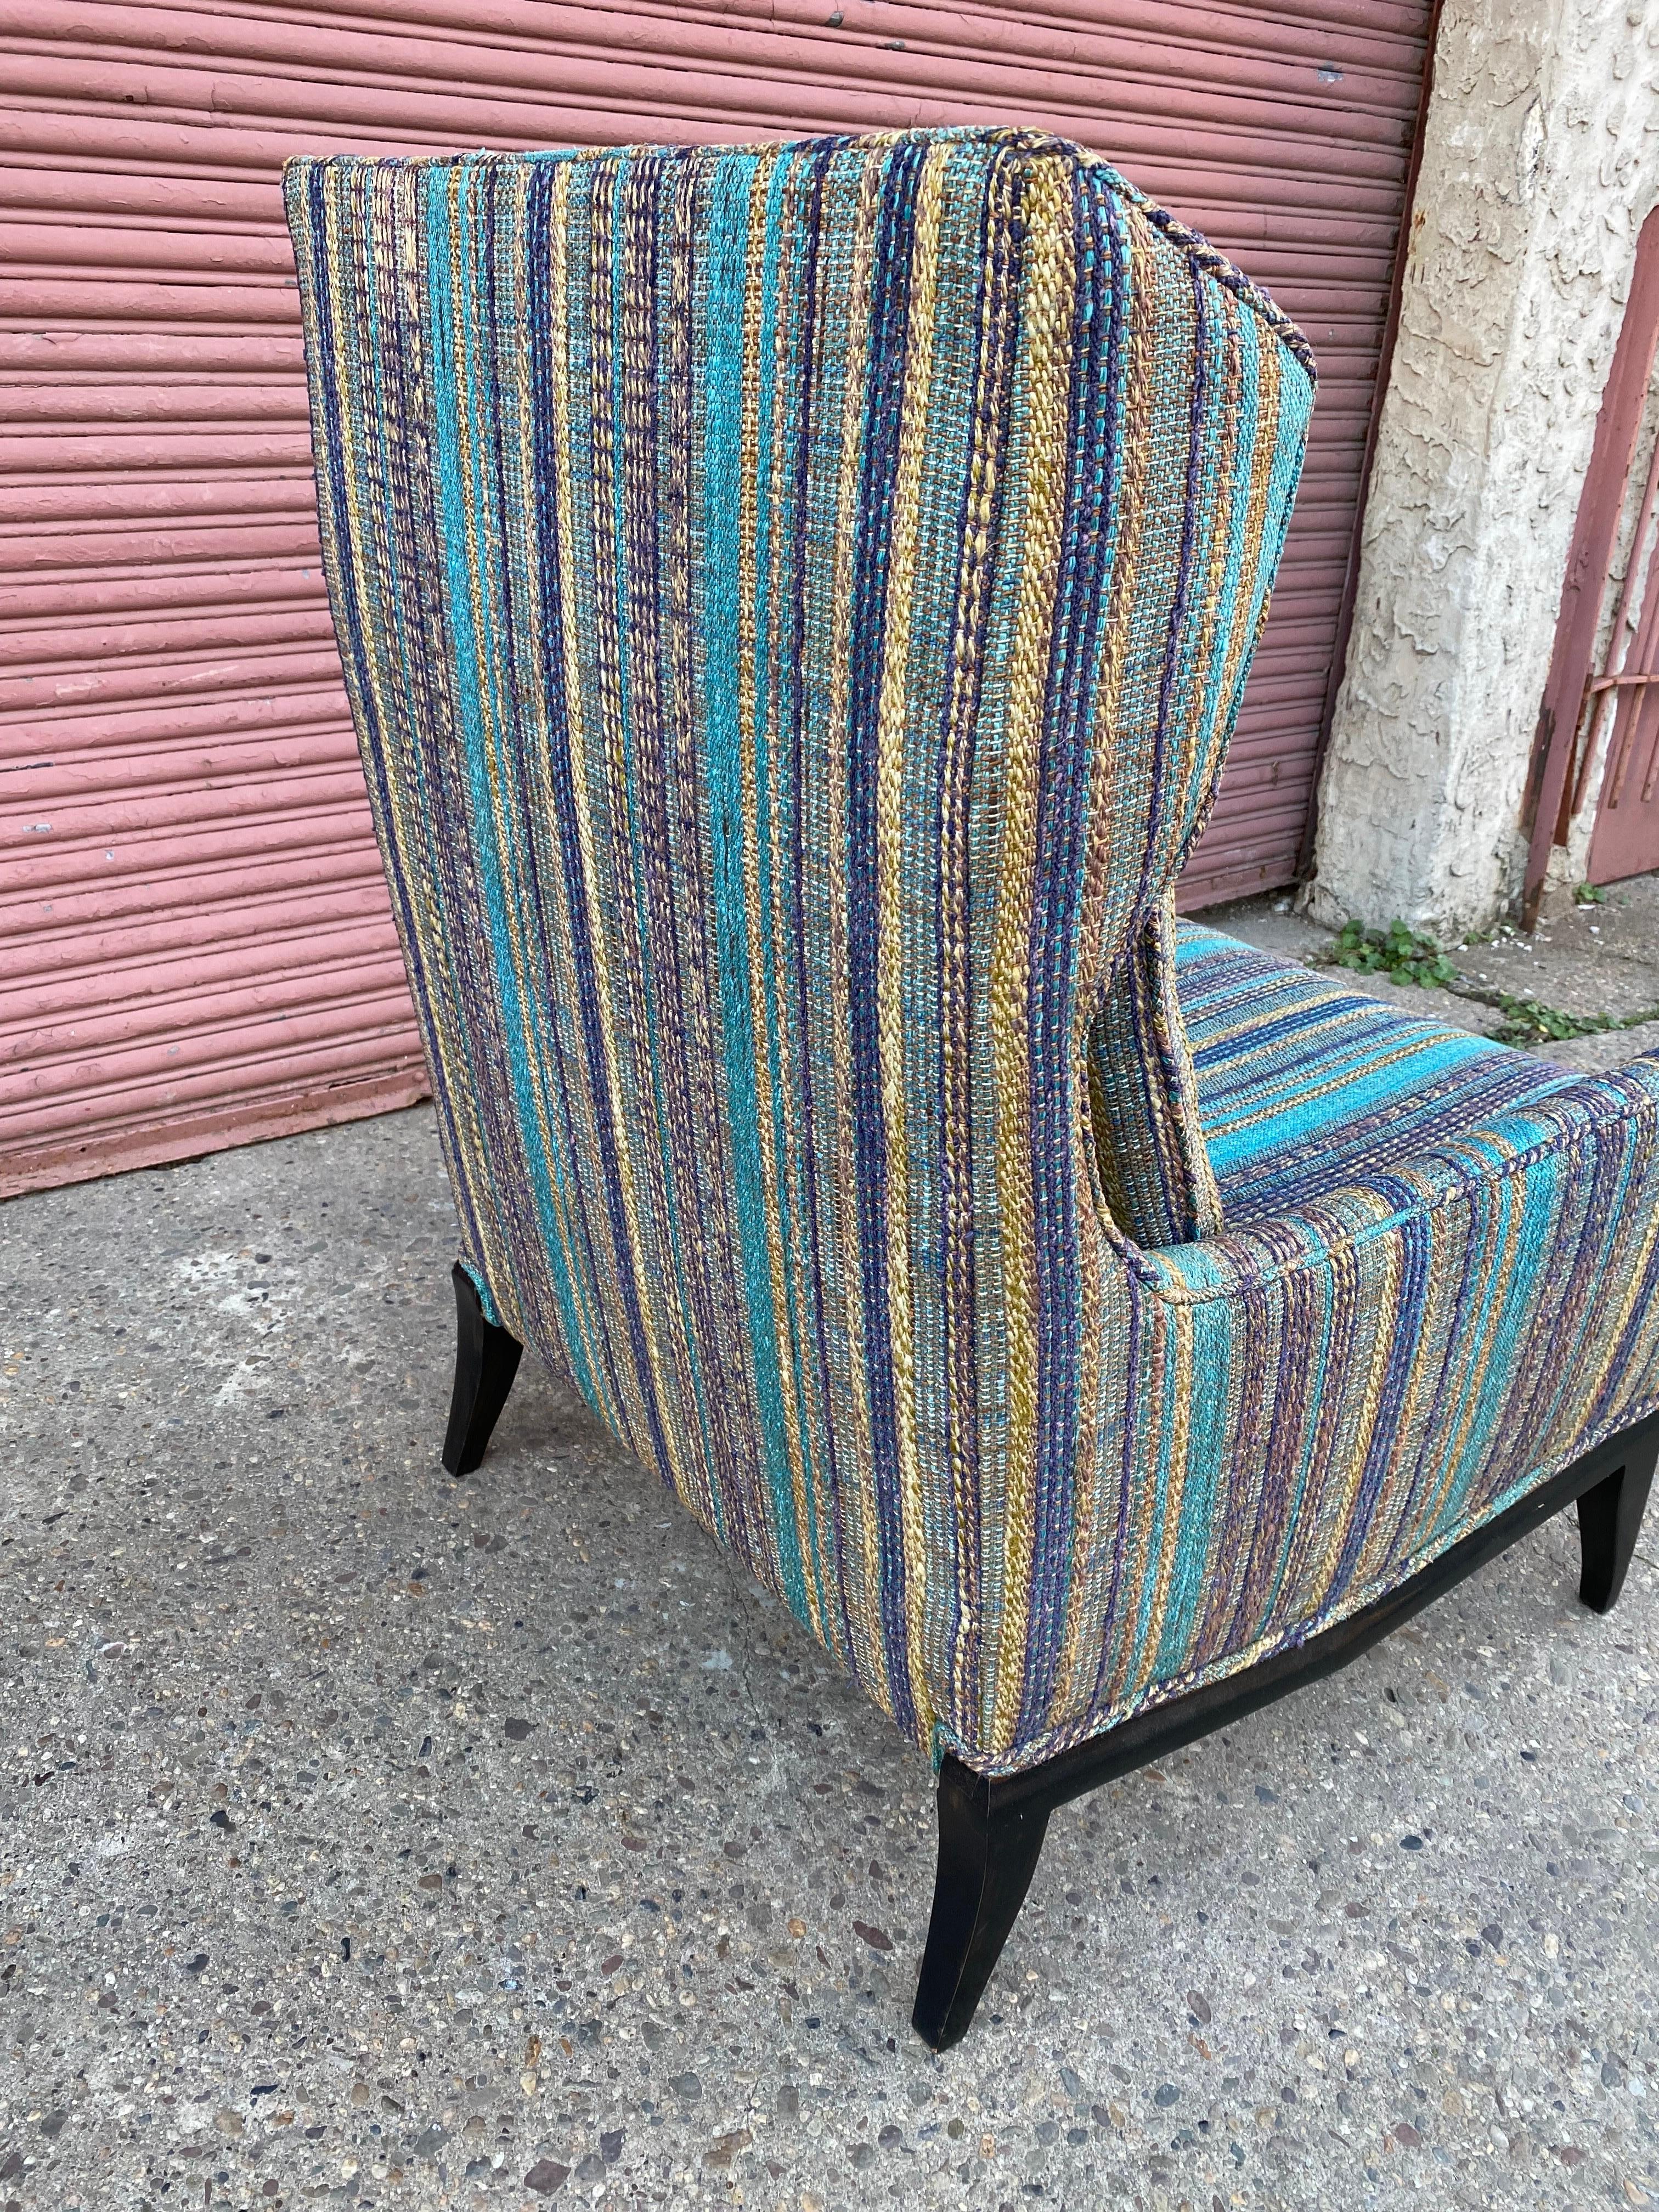 American Edward Wormley Style Lounge Chair with original Jack Lenor Larson Fabric